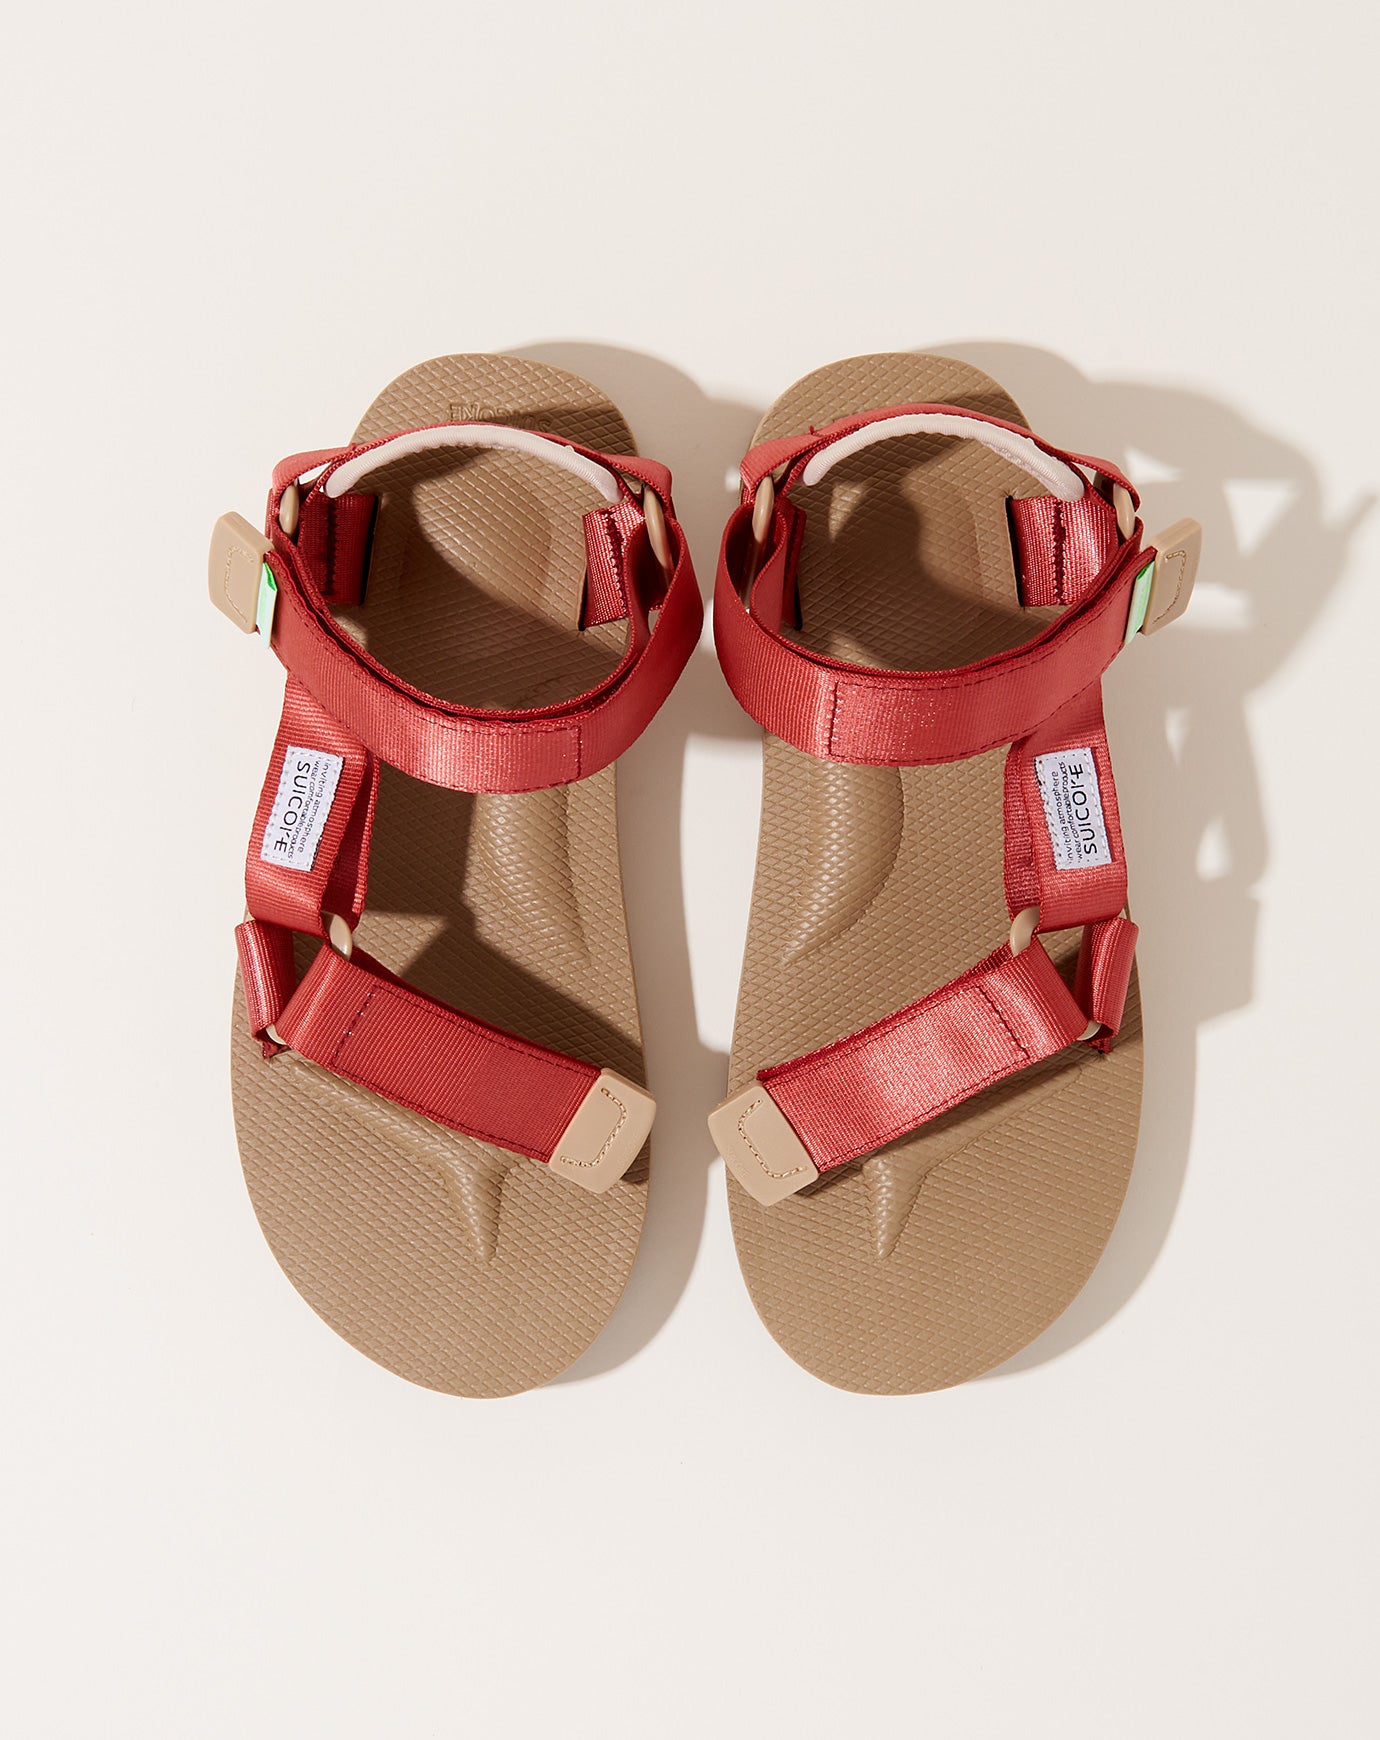 Suicoke DEPA-Cab in Red Clay